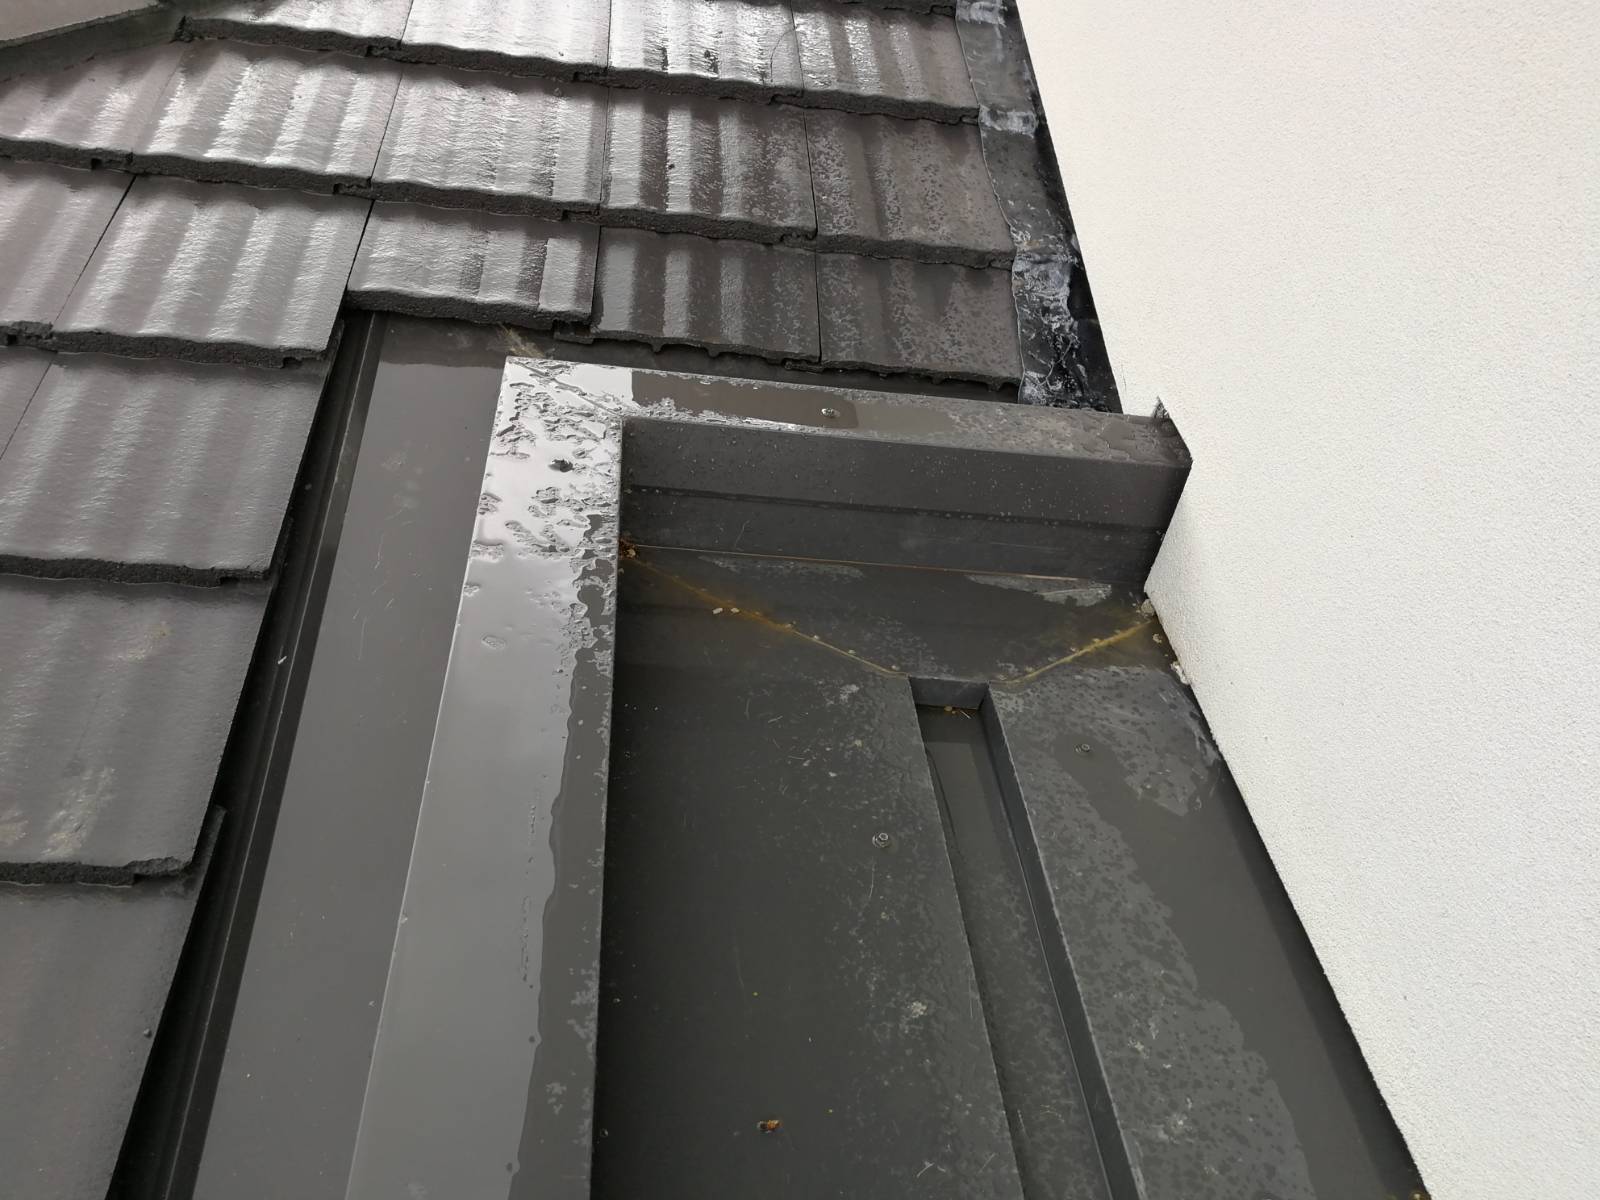 Is this normal construction for ribbed metal roof?